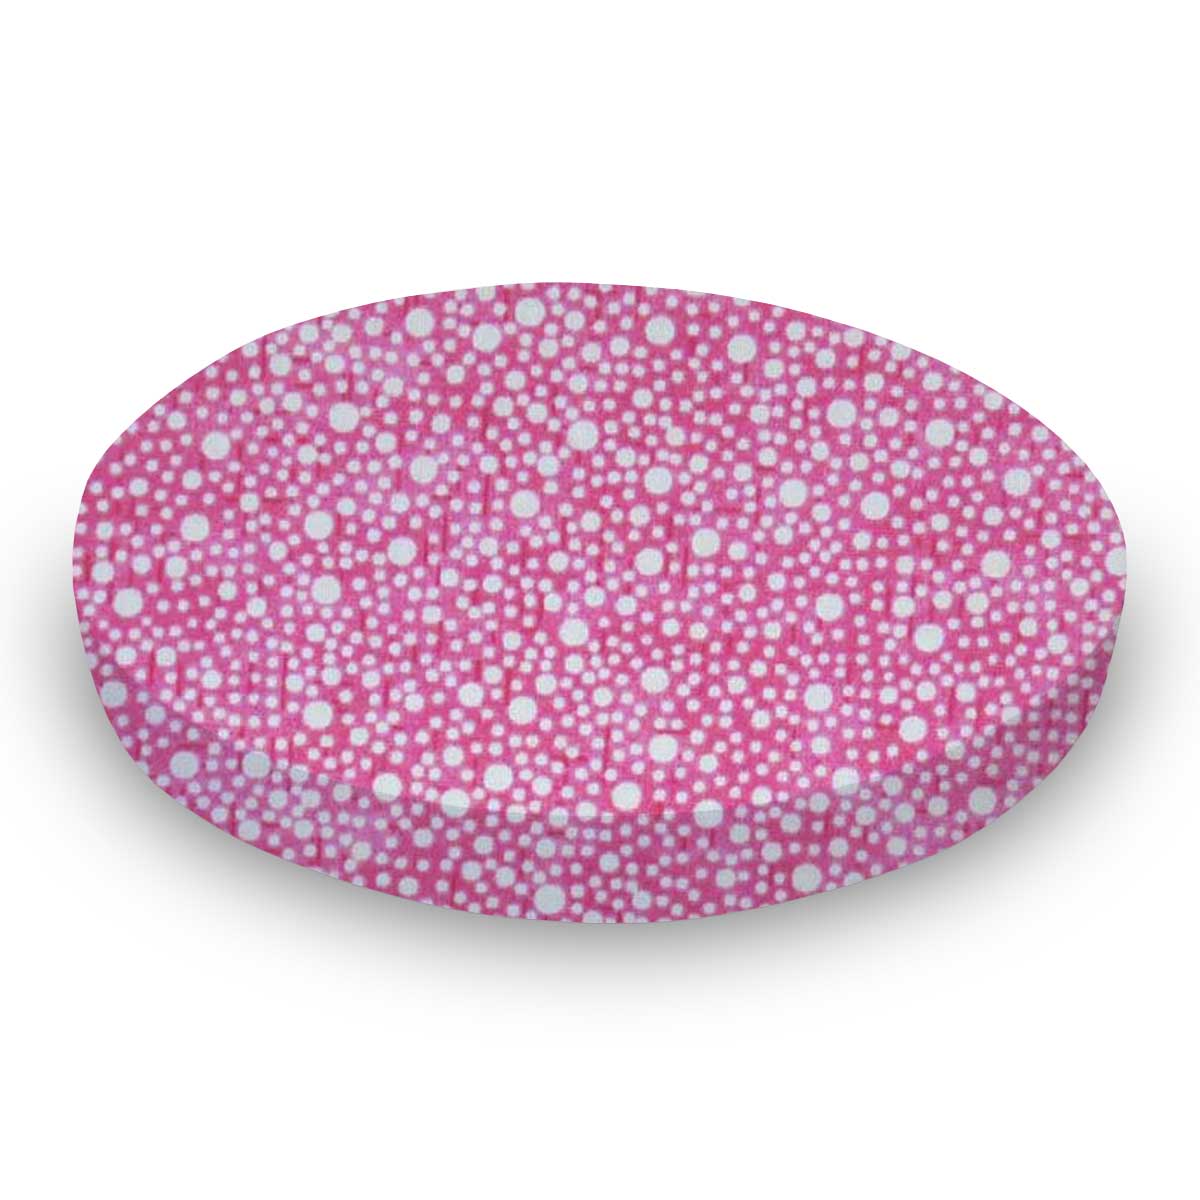 Oval Crib (Stokke Sleepi) - Confetti Dots Pink - Fitted  Oval